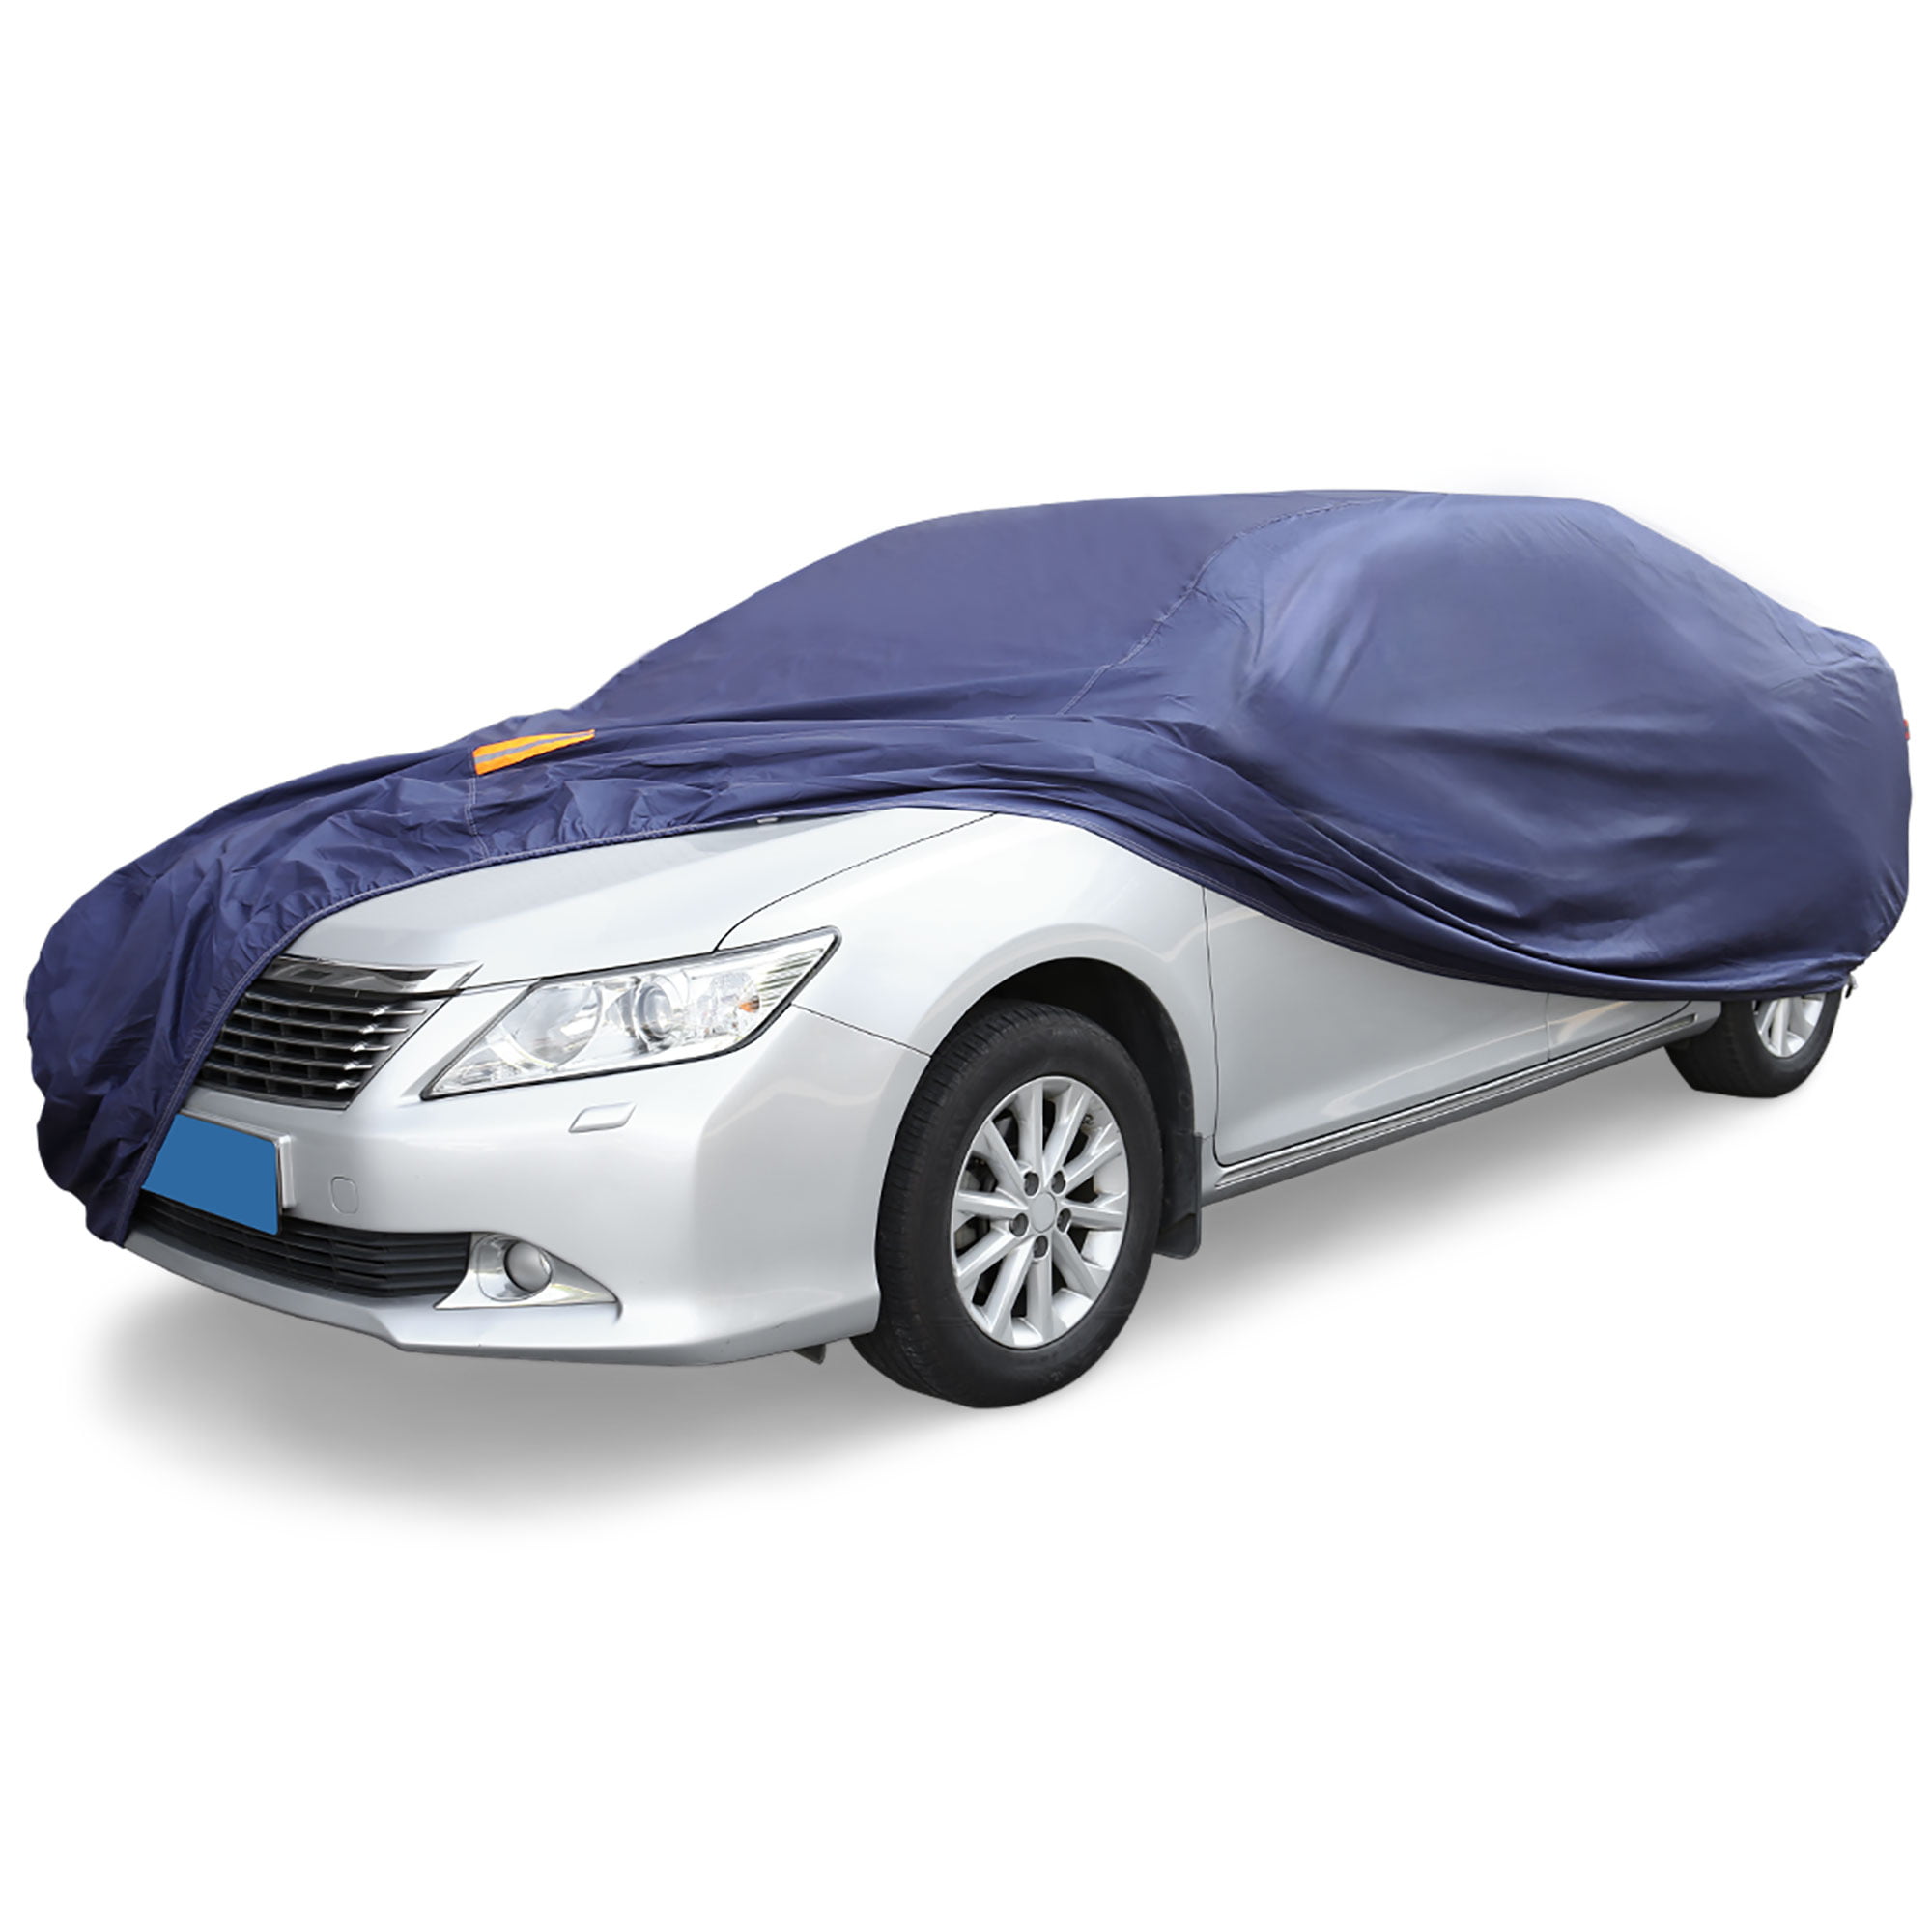 Car Cover Waterproof Breathable For Renault Zoe, Car Covers For